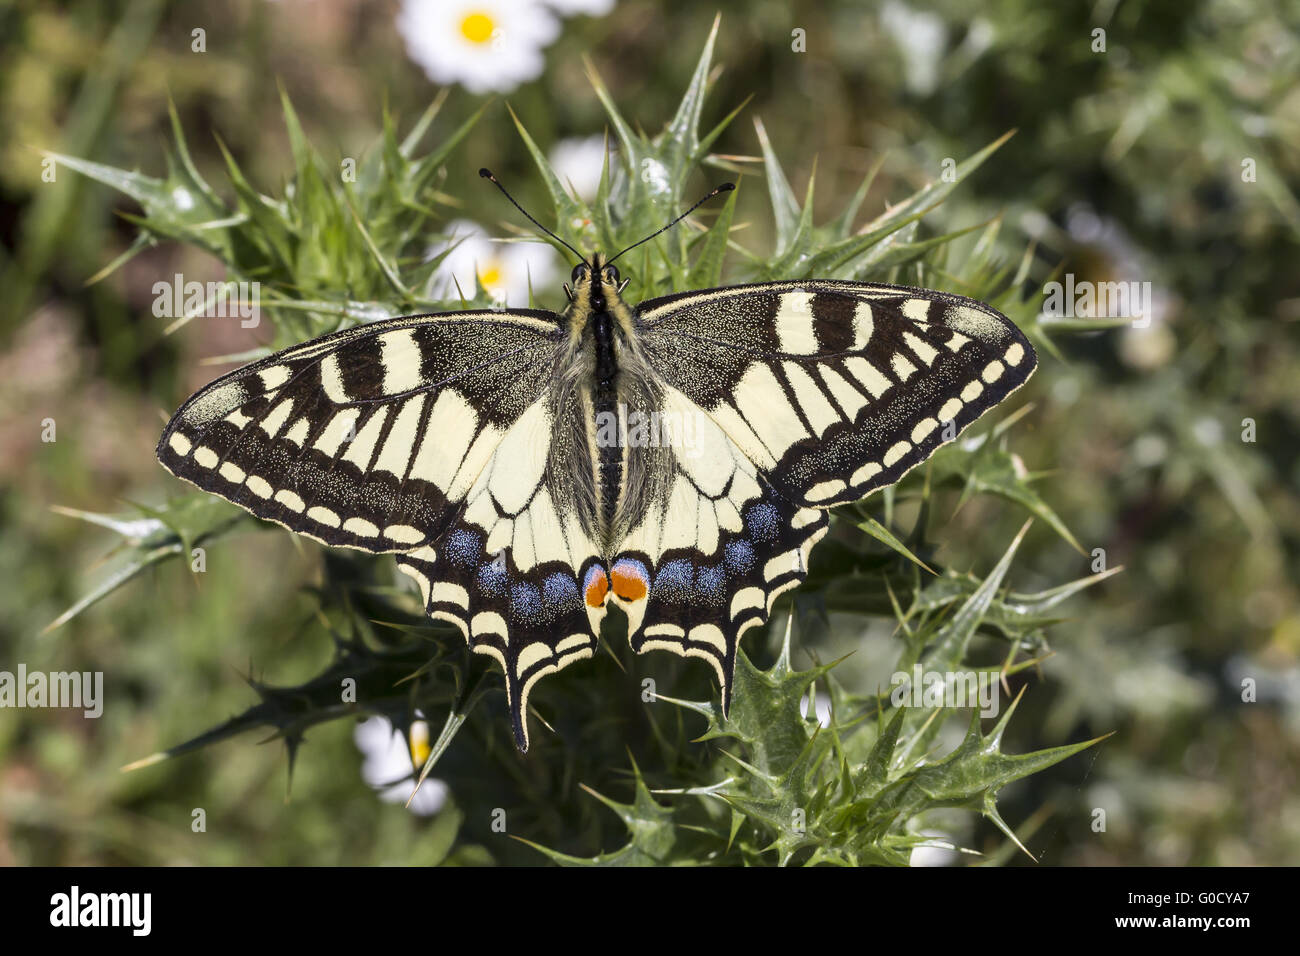 Papilio machaon, Swallowtail butterfly from Italy Stock Photo